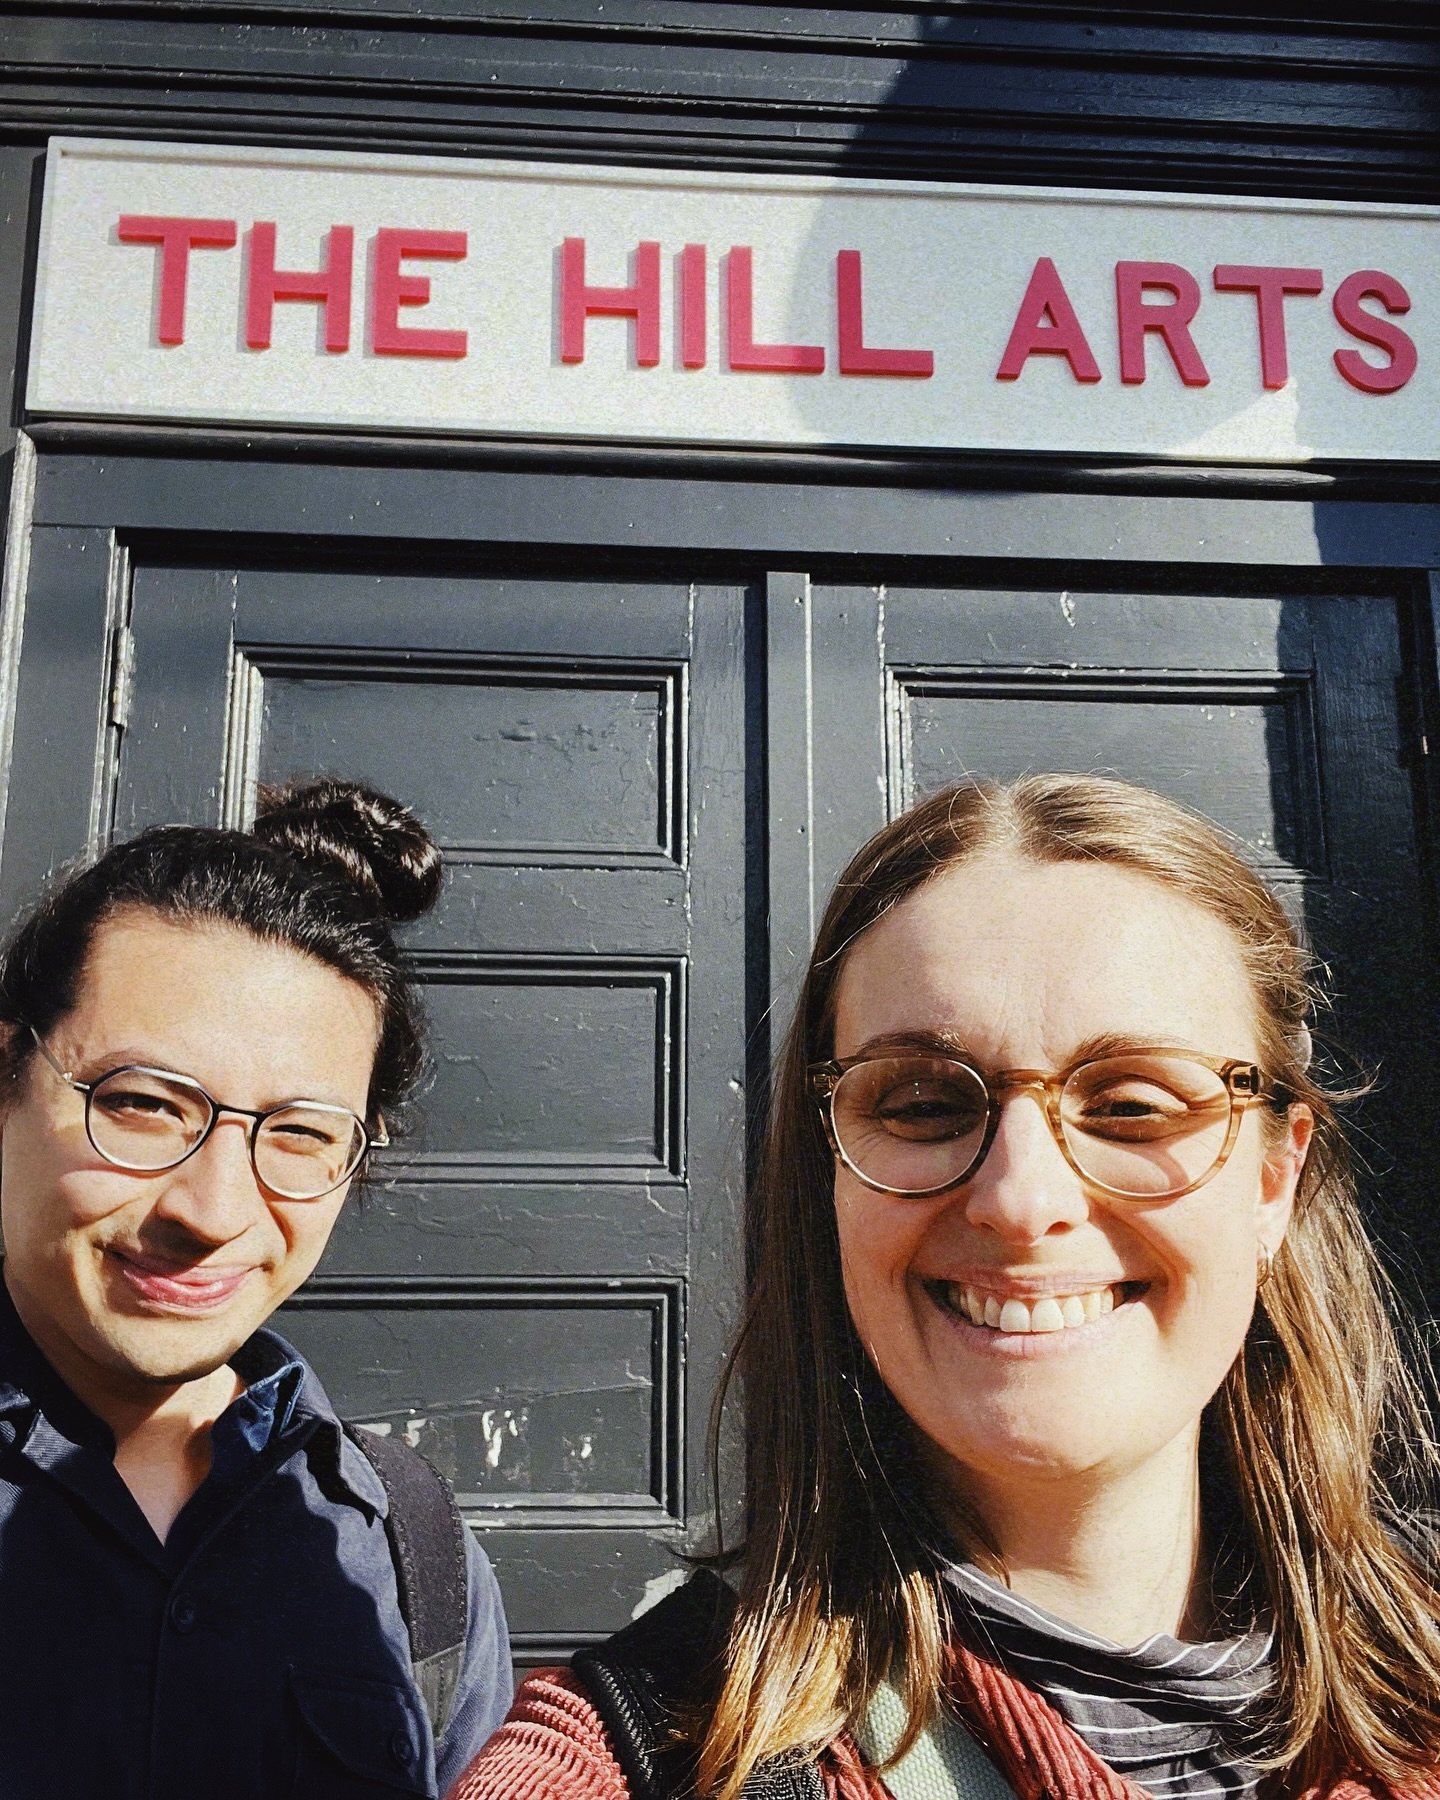 Tonight we are in sunny Portland at @thehillartsme! Come join us- tickets still available.